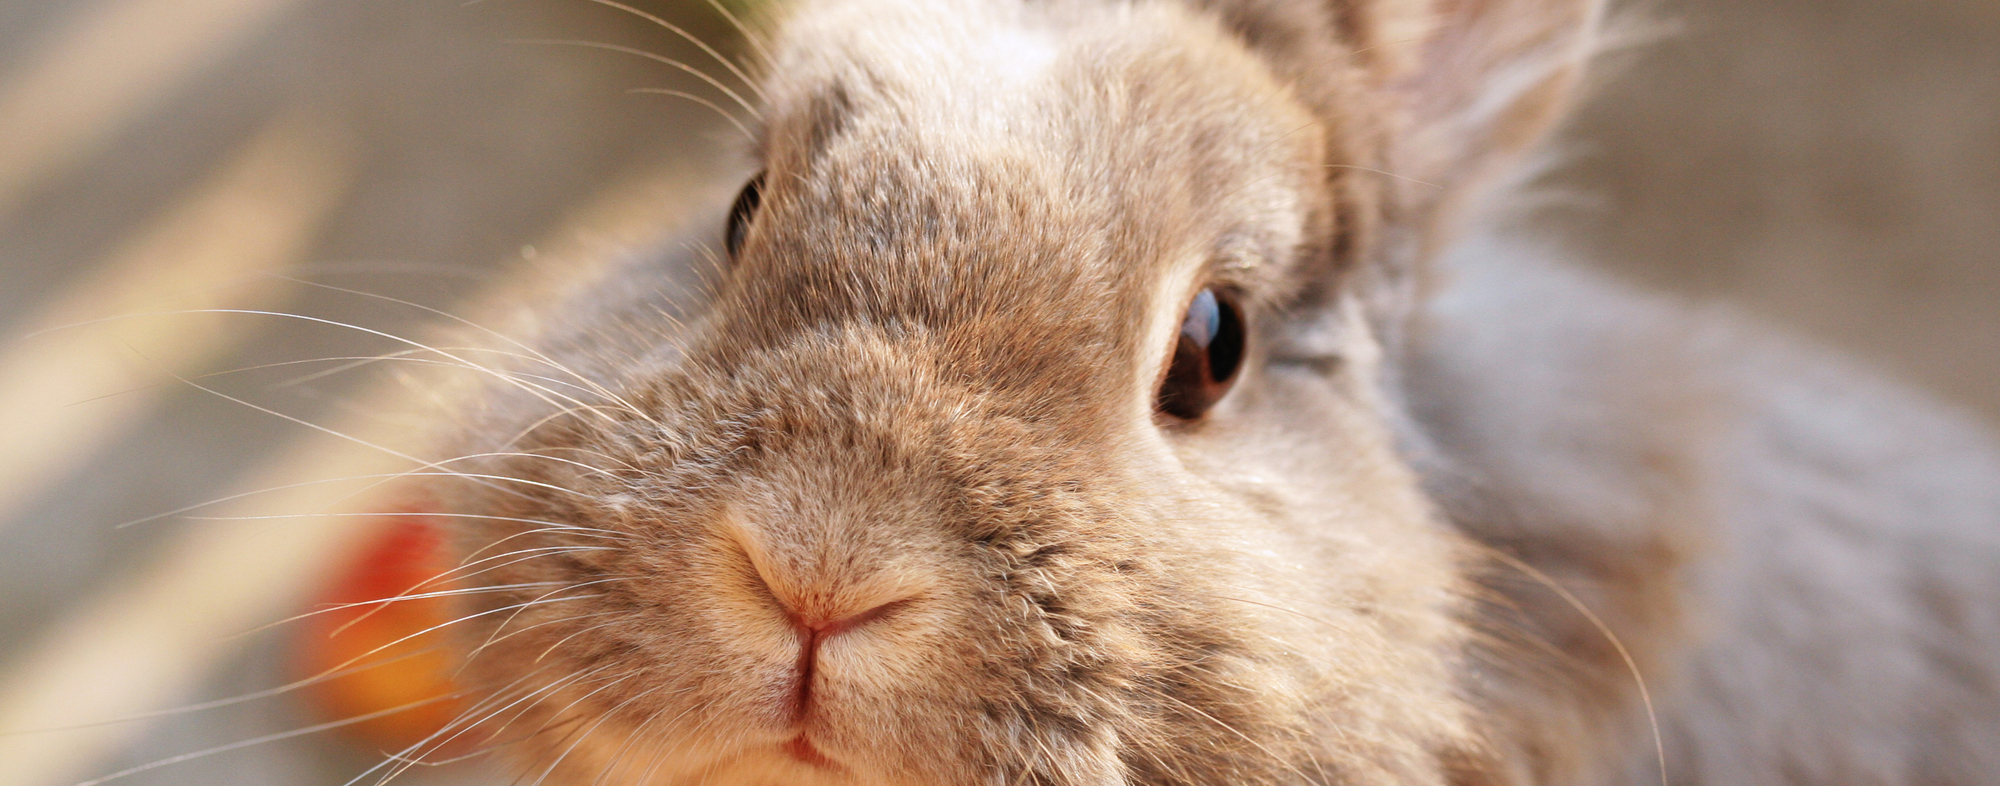 Pet rabbit staring calmly and intently ahead, outside on Rabbit Day